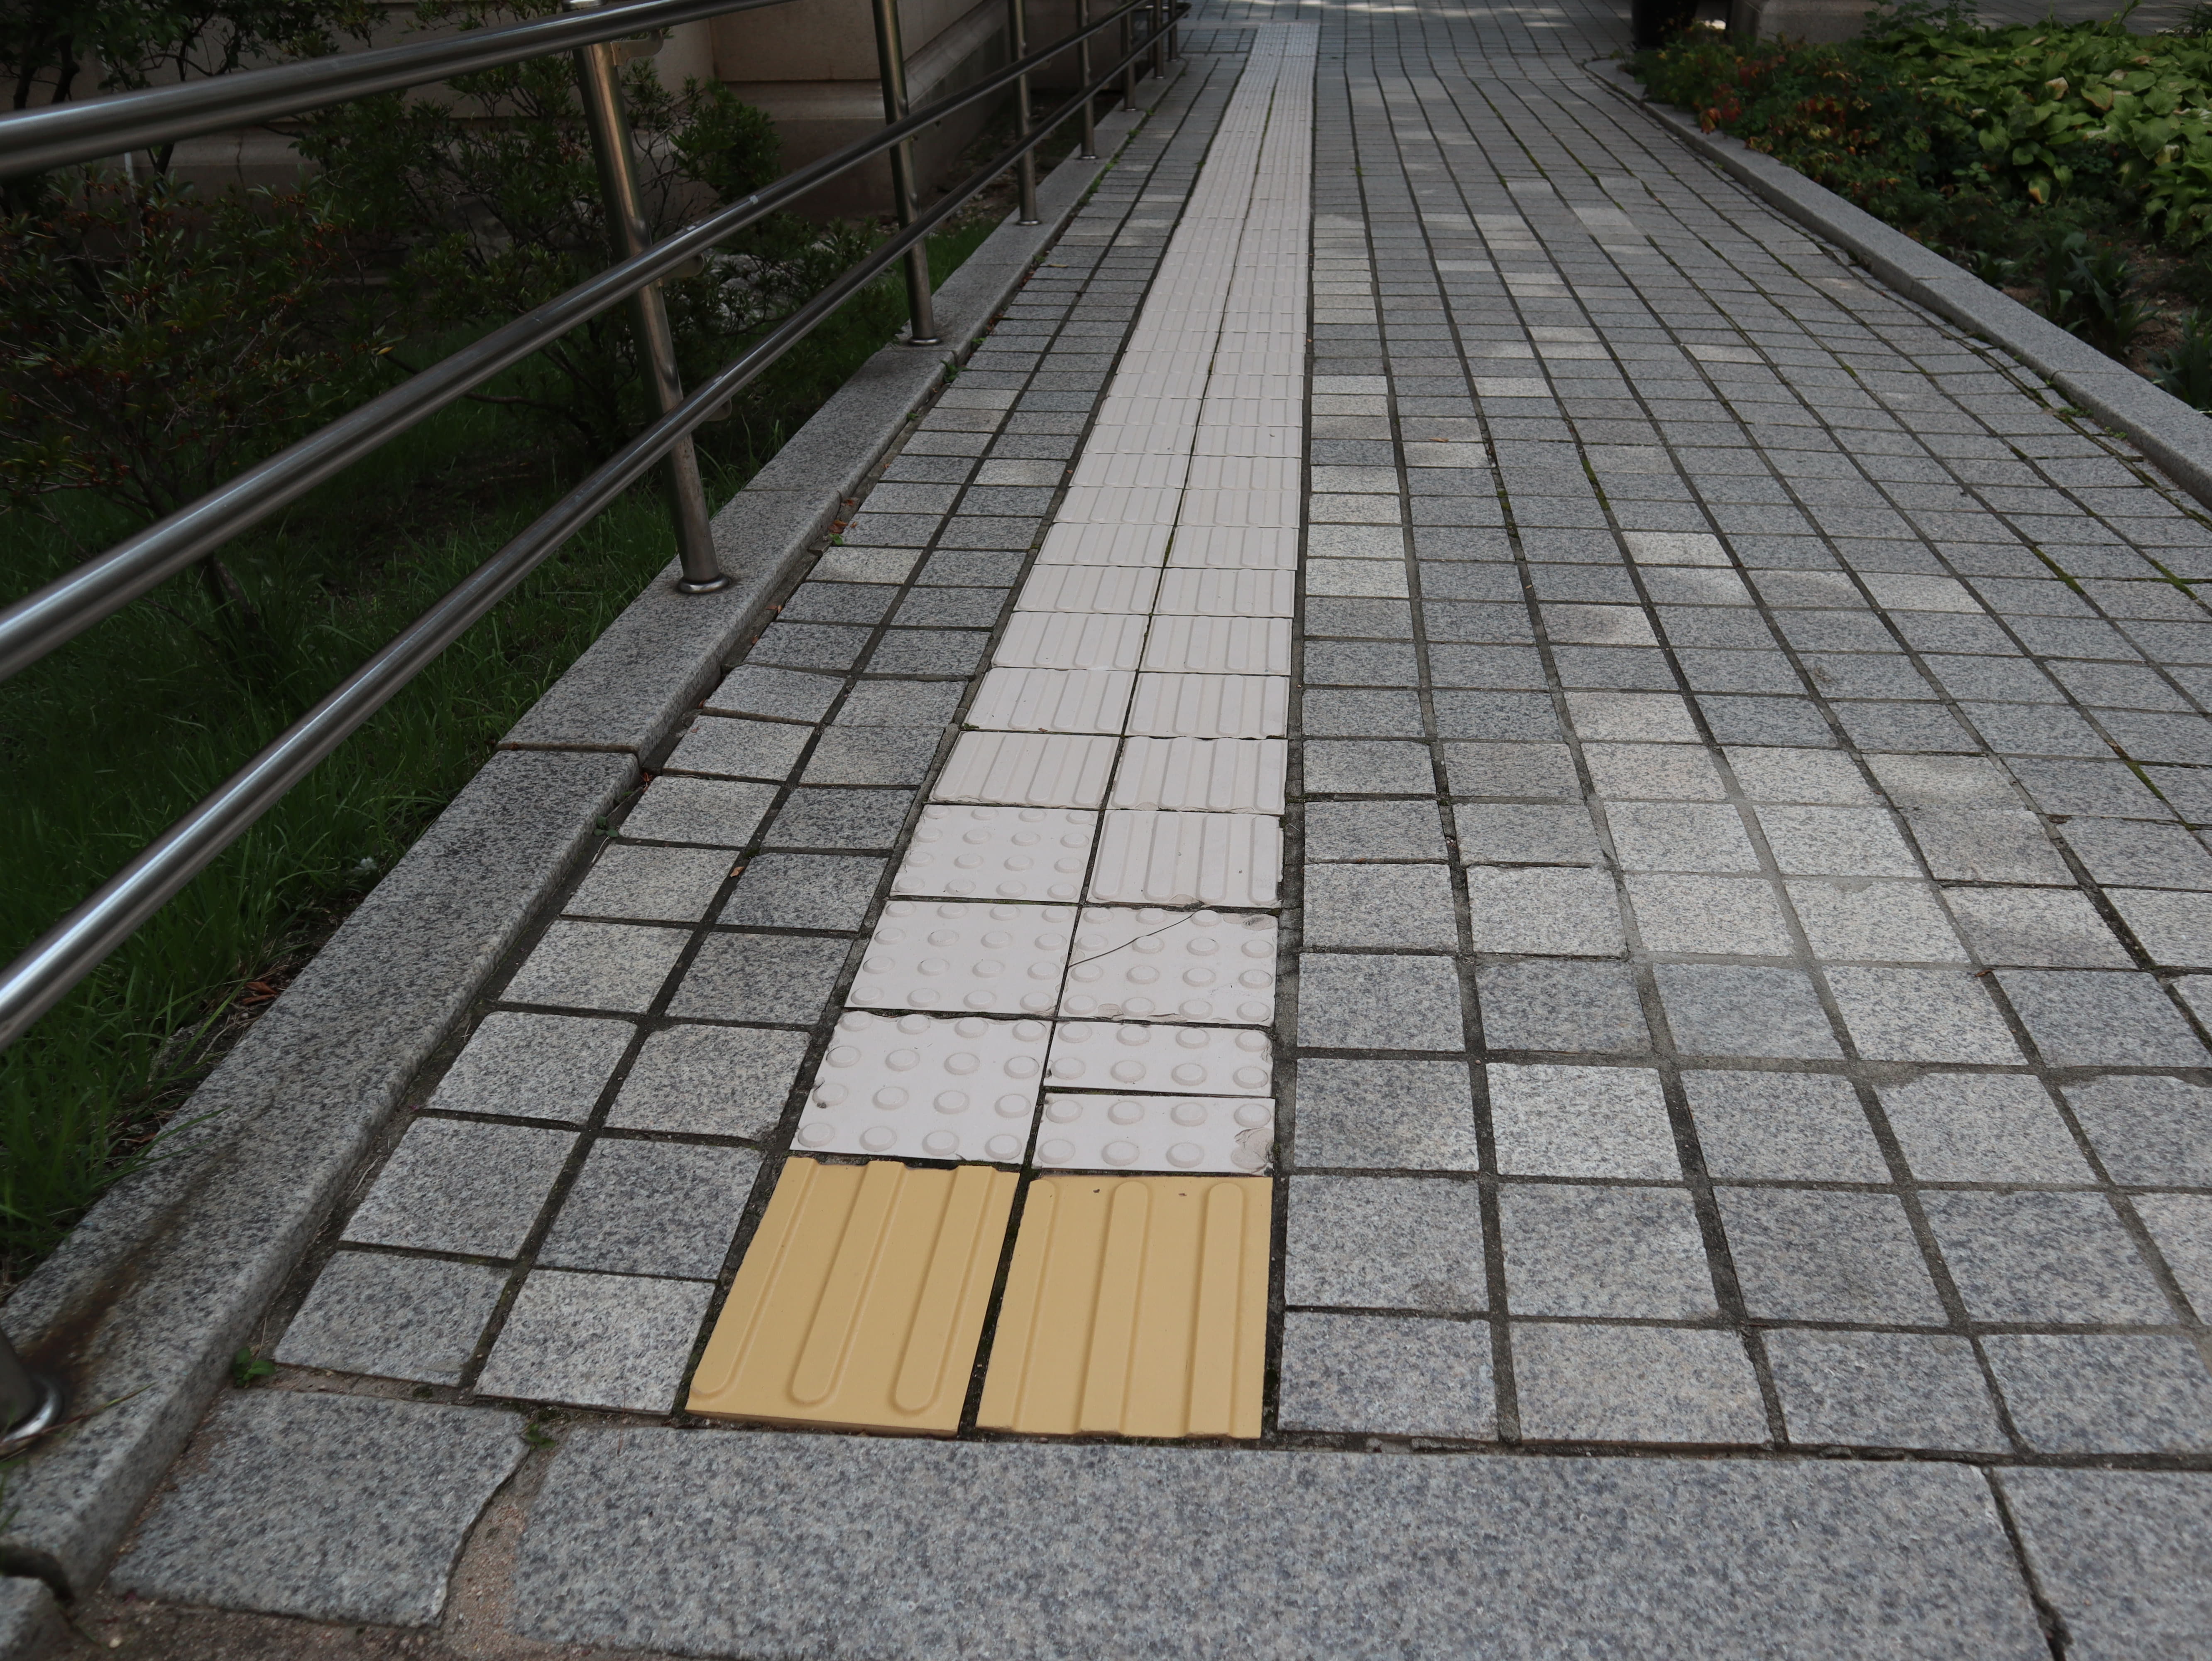 Entryway0 : Flat access road to the museum with square tiles